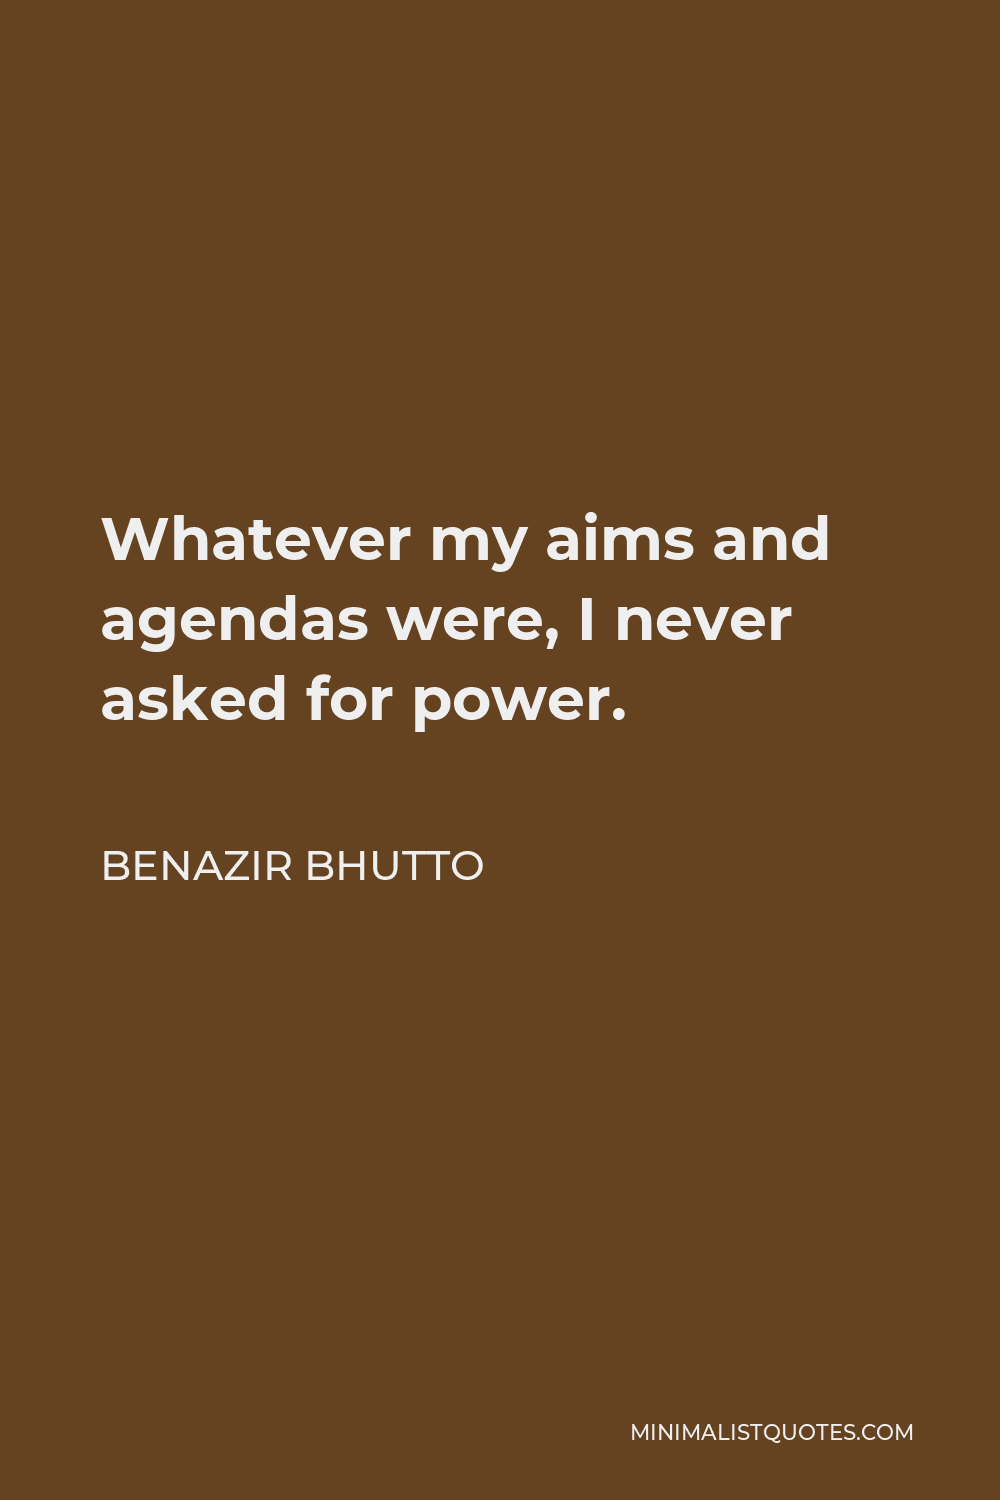 Benazir Bhutto Quote - Whatever my aims and agendas were, I never asked for power.